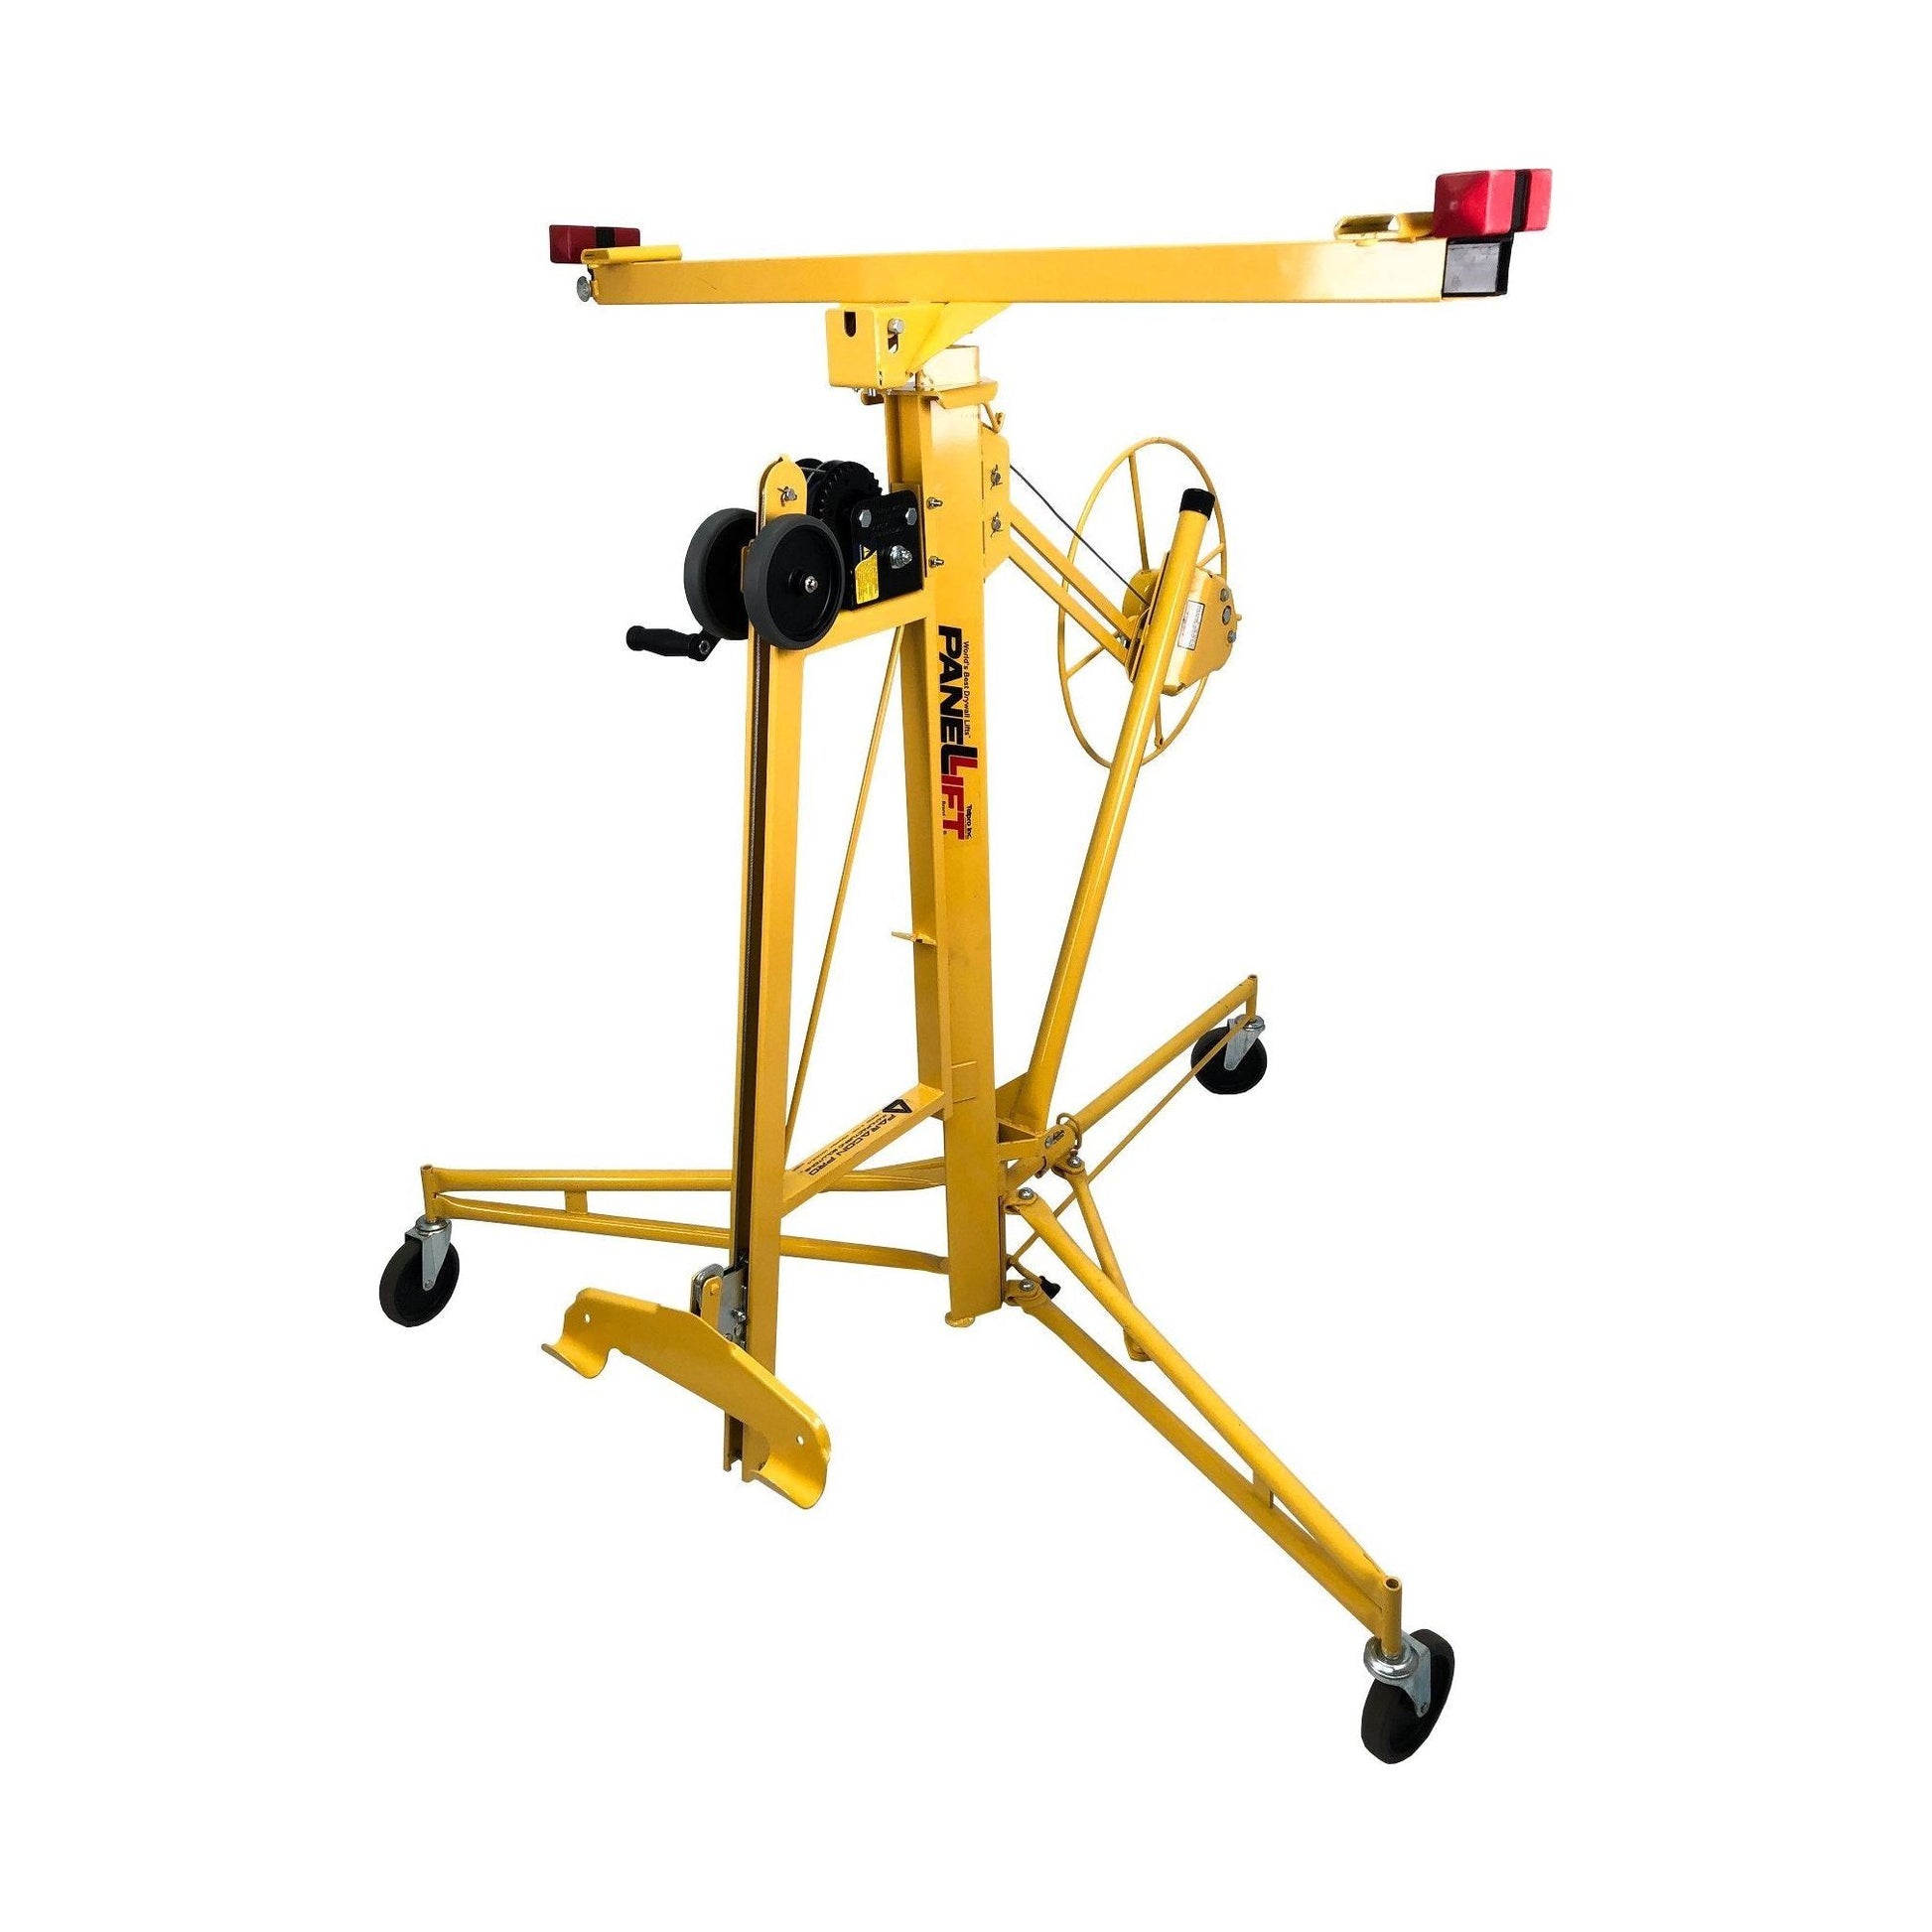 Panellift® Model 195 Lift Loader - Paragon Pro Manufacturing Solutions Inc.